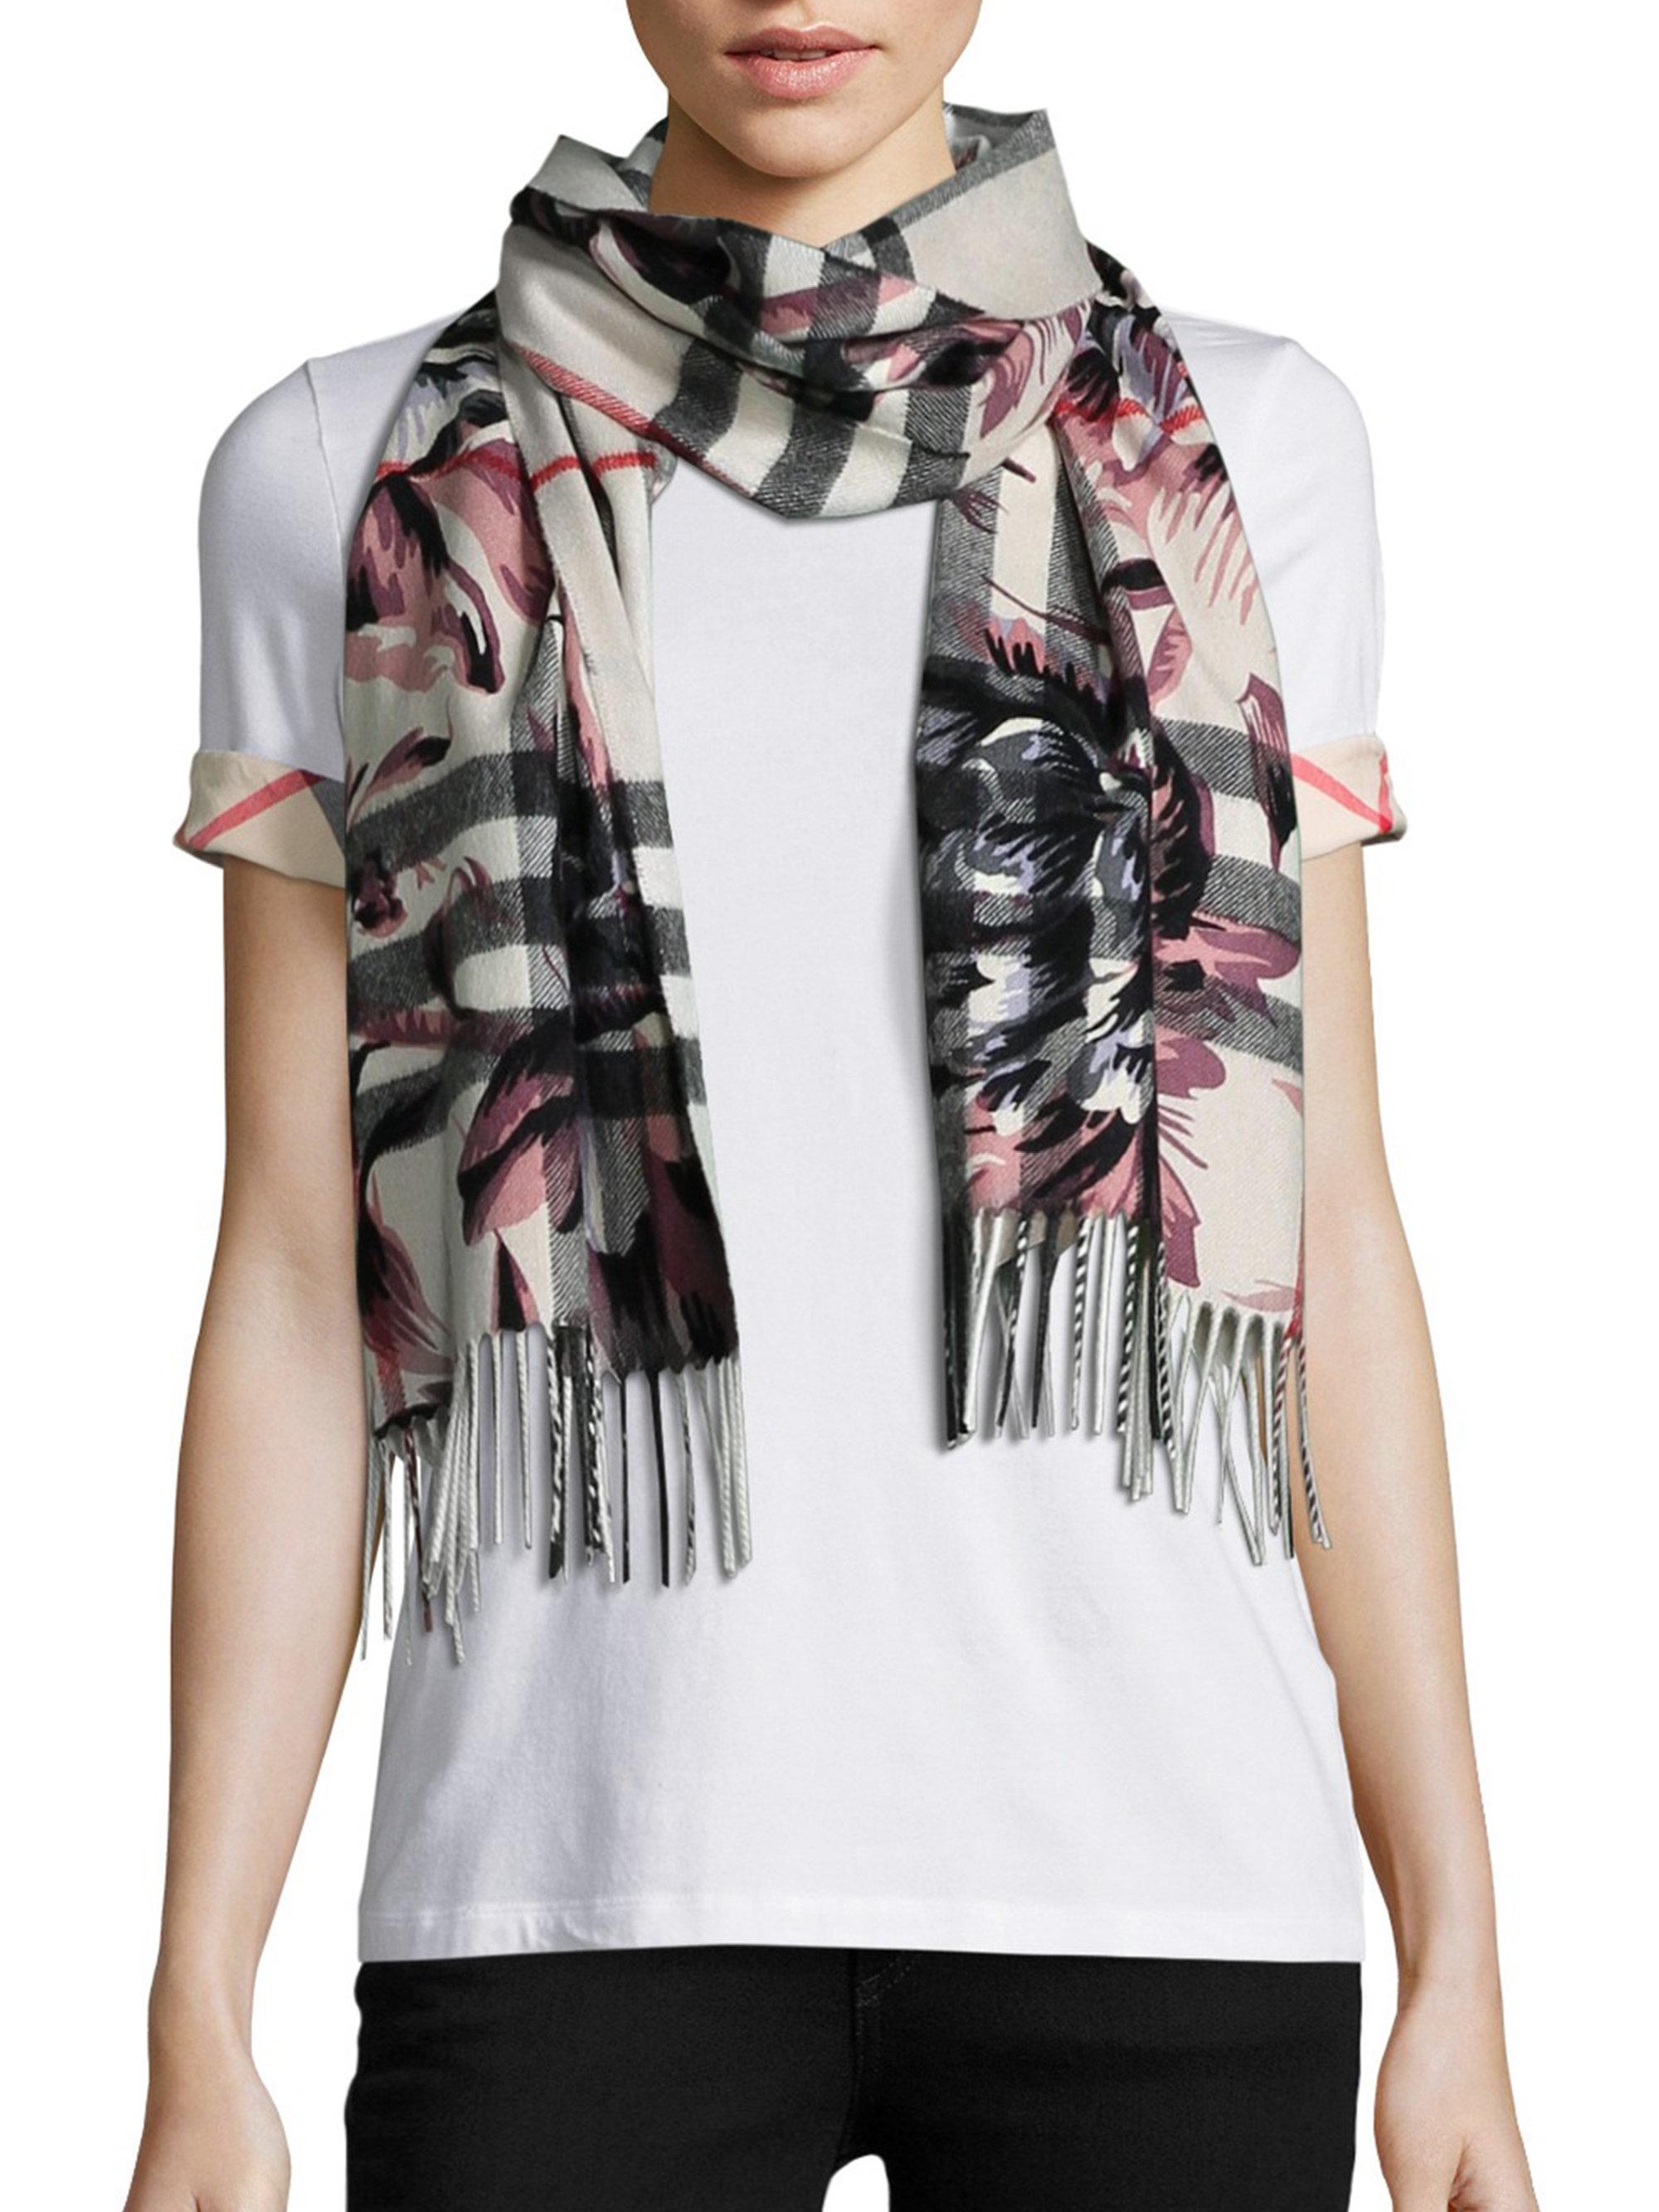 burberry giant check cashmere scarf ash rose